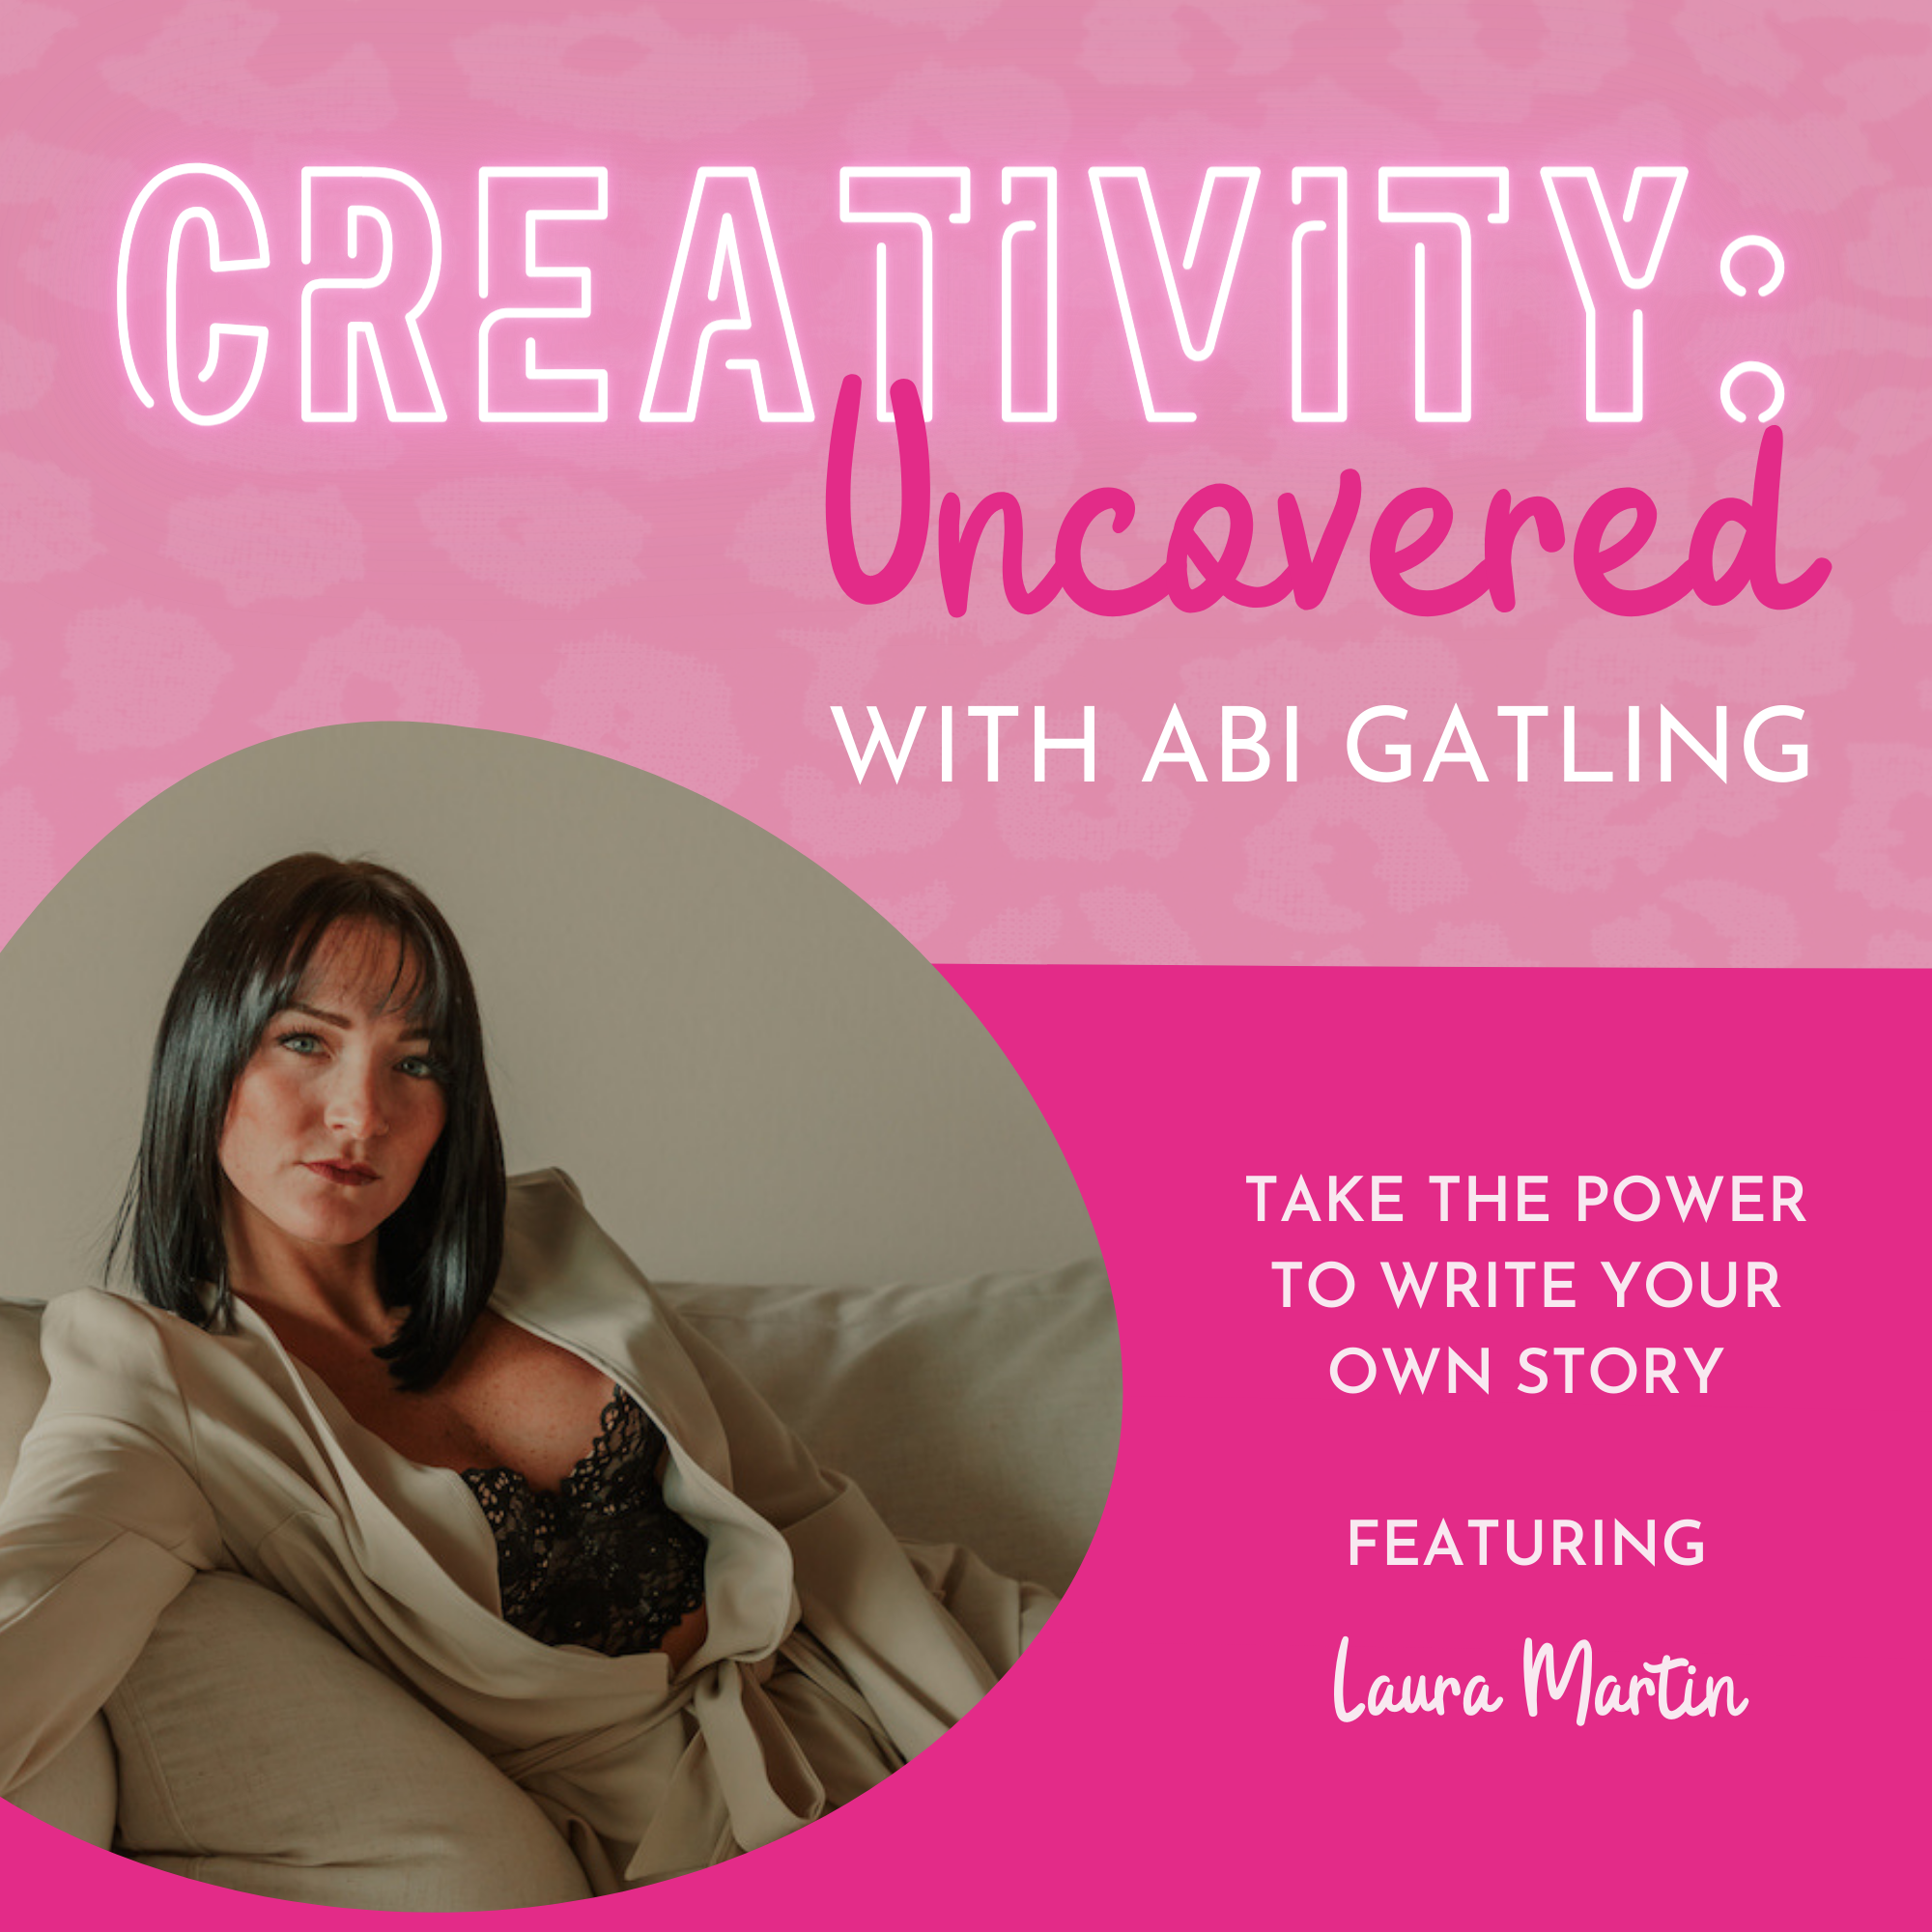 Creativity: Uncovered podcast episode graphic featuring guest Laura Martin